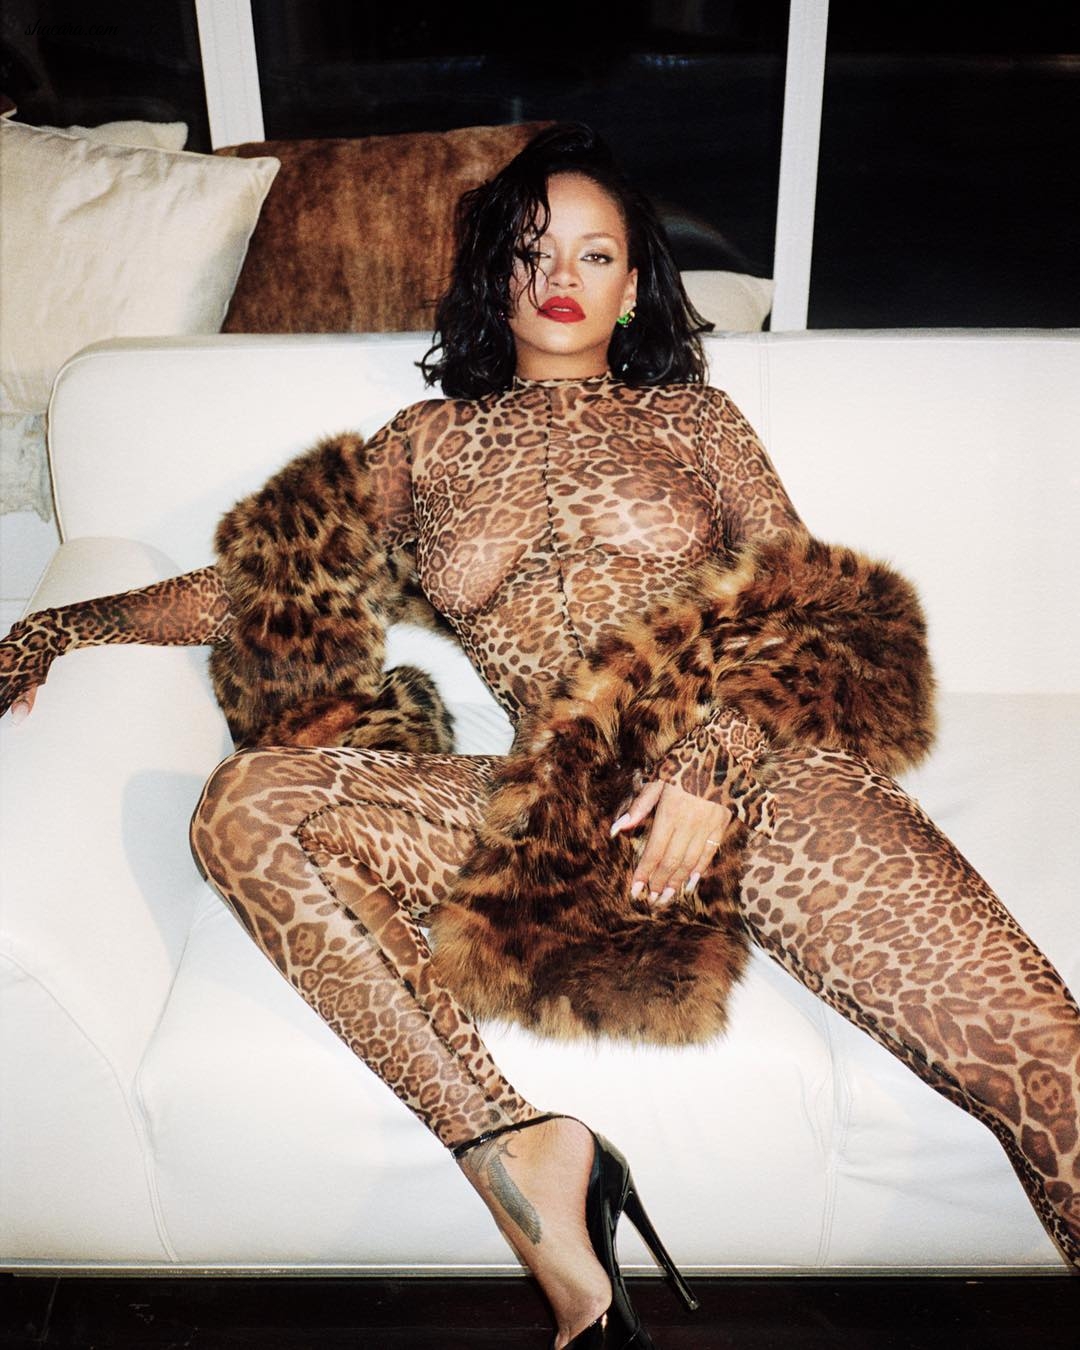 Rihanna Takes On Leopard Print Outfit And Fur In New Fashion Editorial